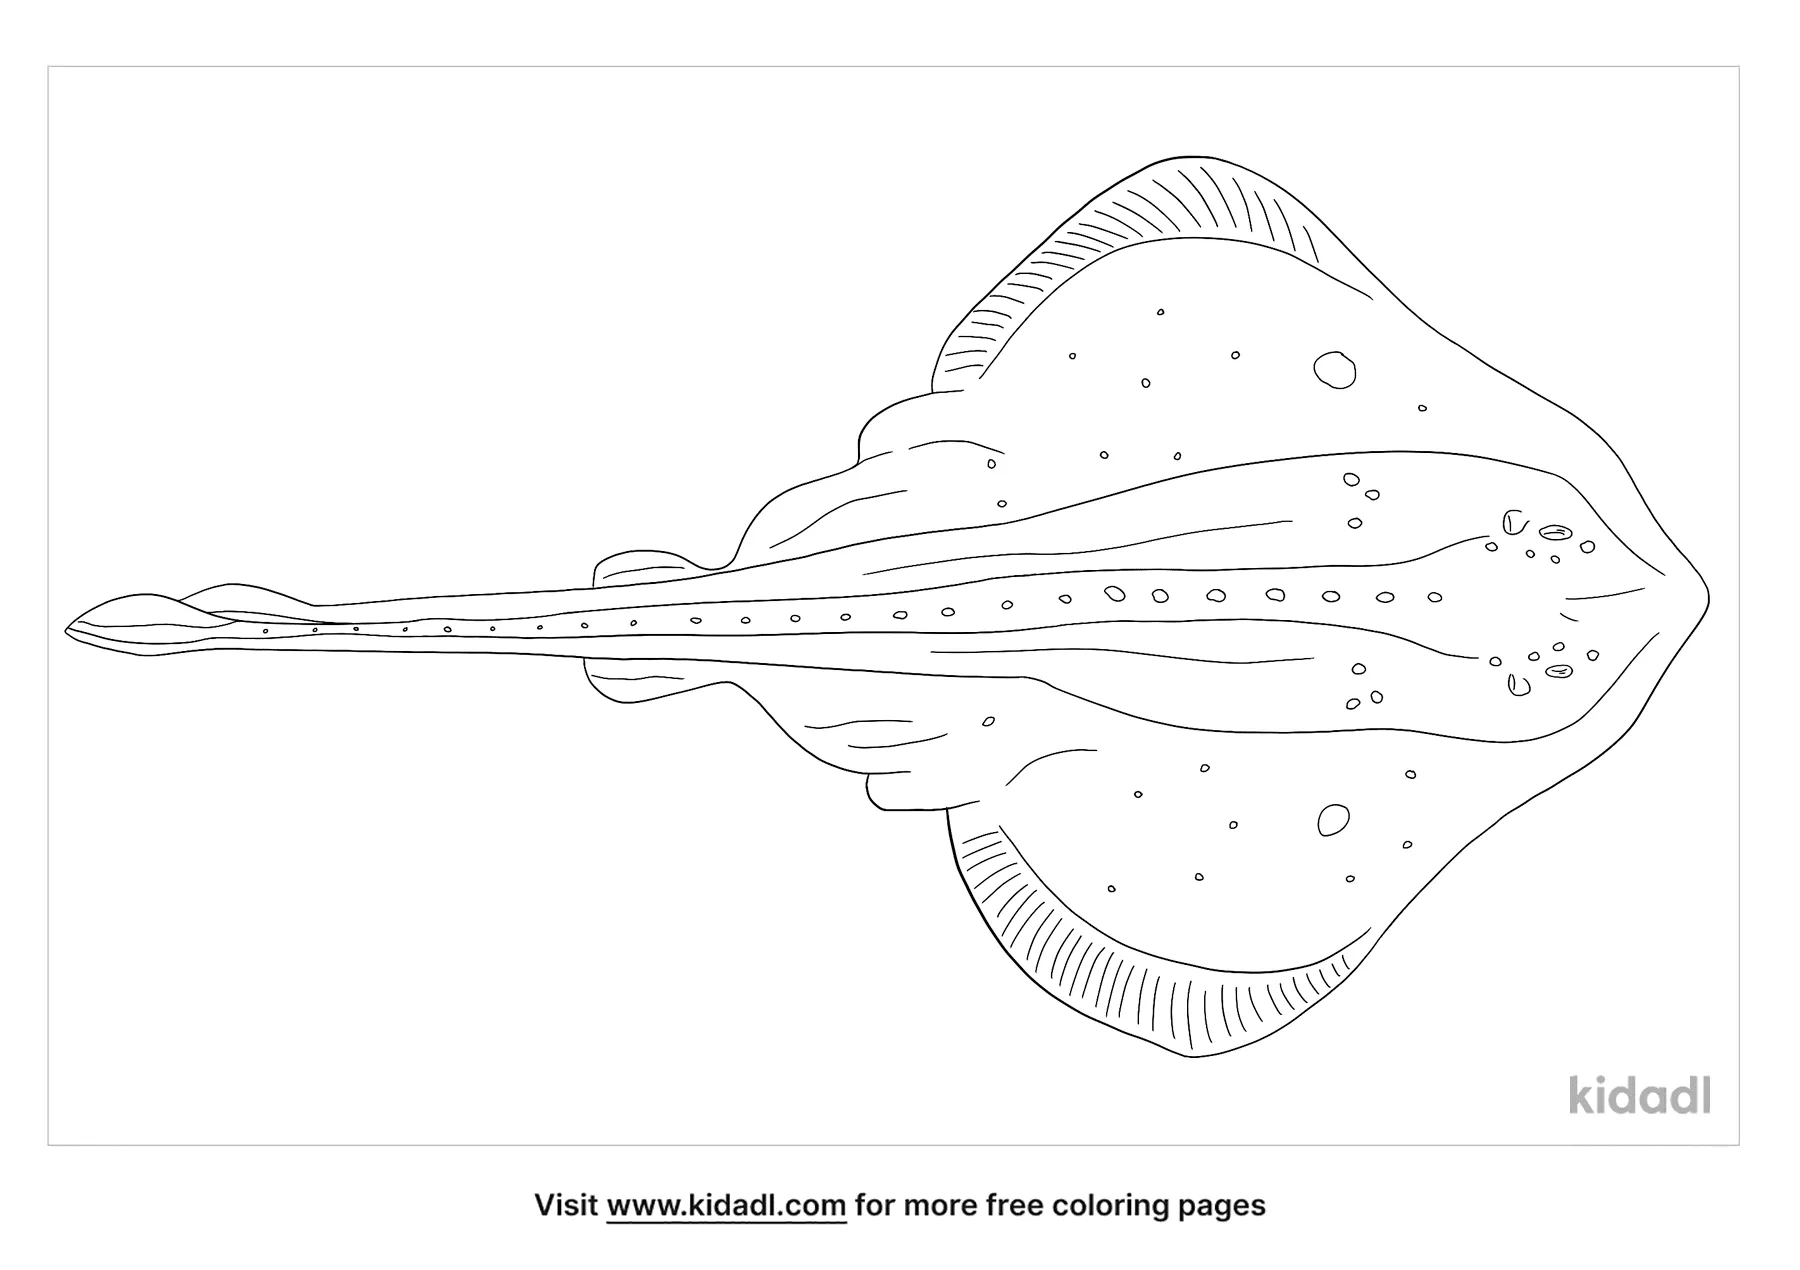 Free skate fish coloring page coloring page printables